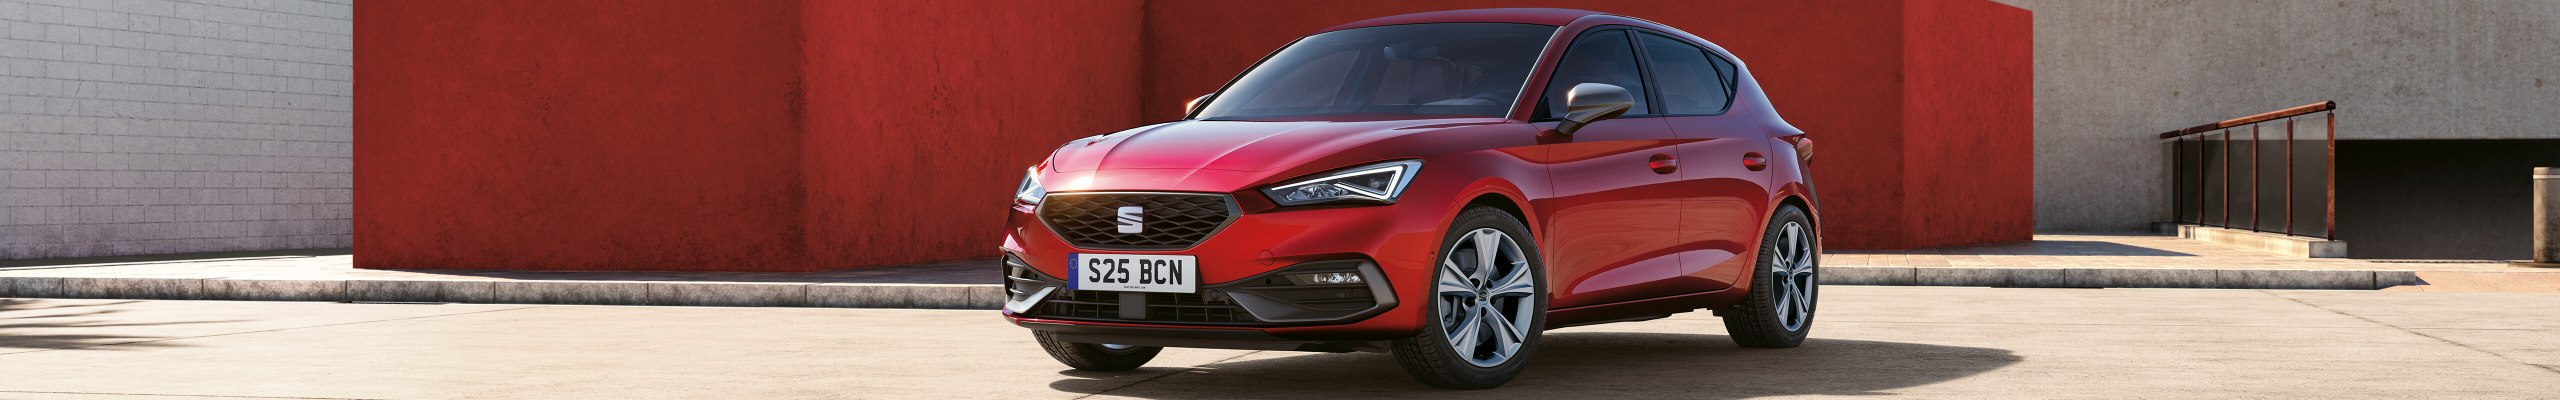 SEAT Leon takes top prize at AUTOBEST 2021